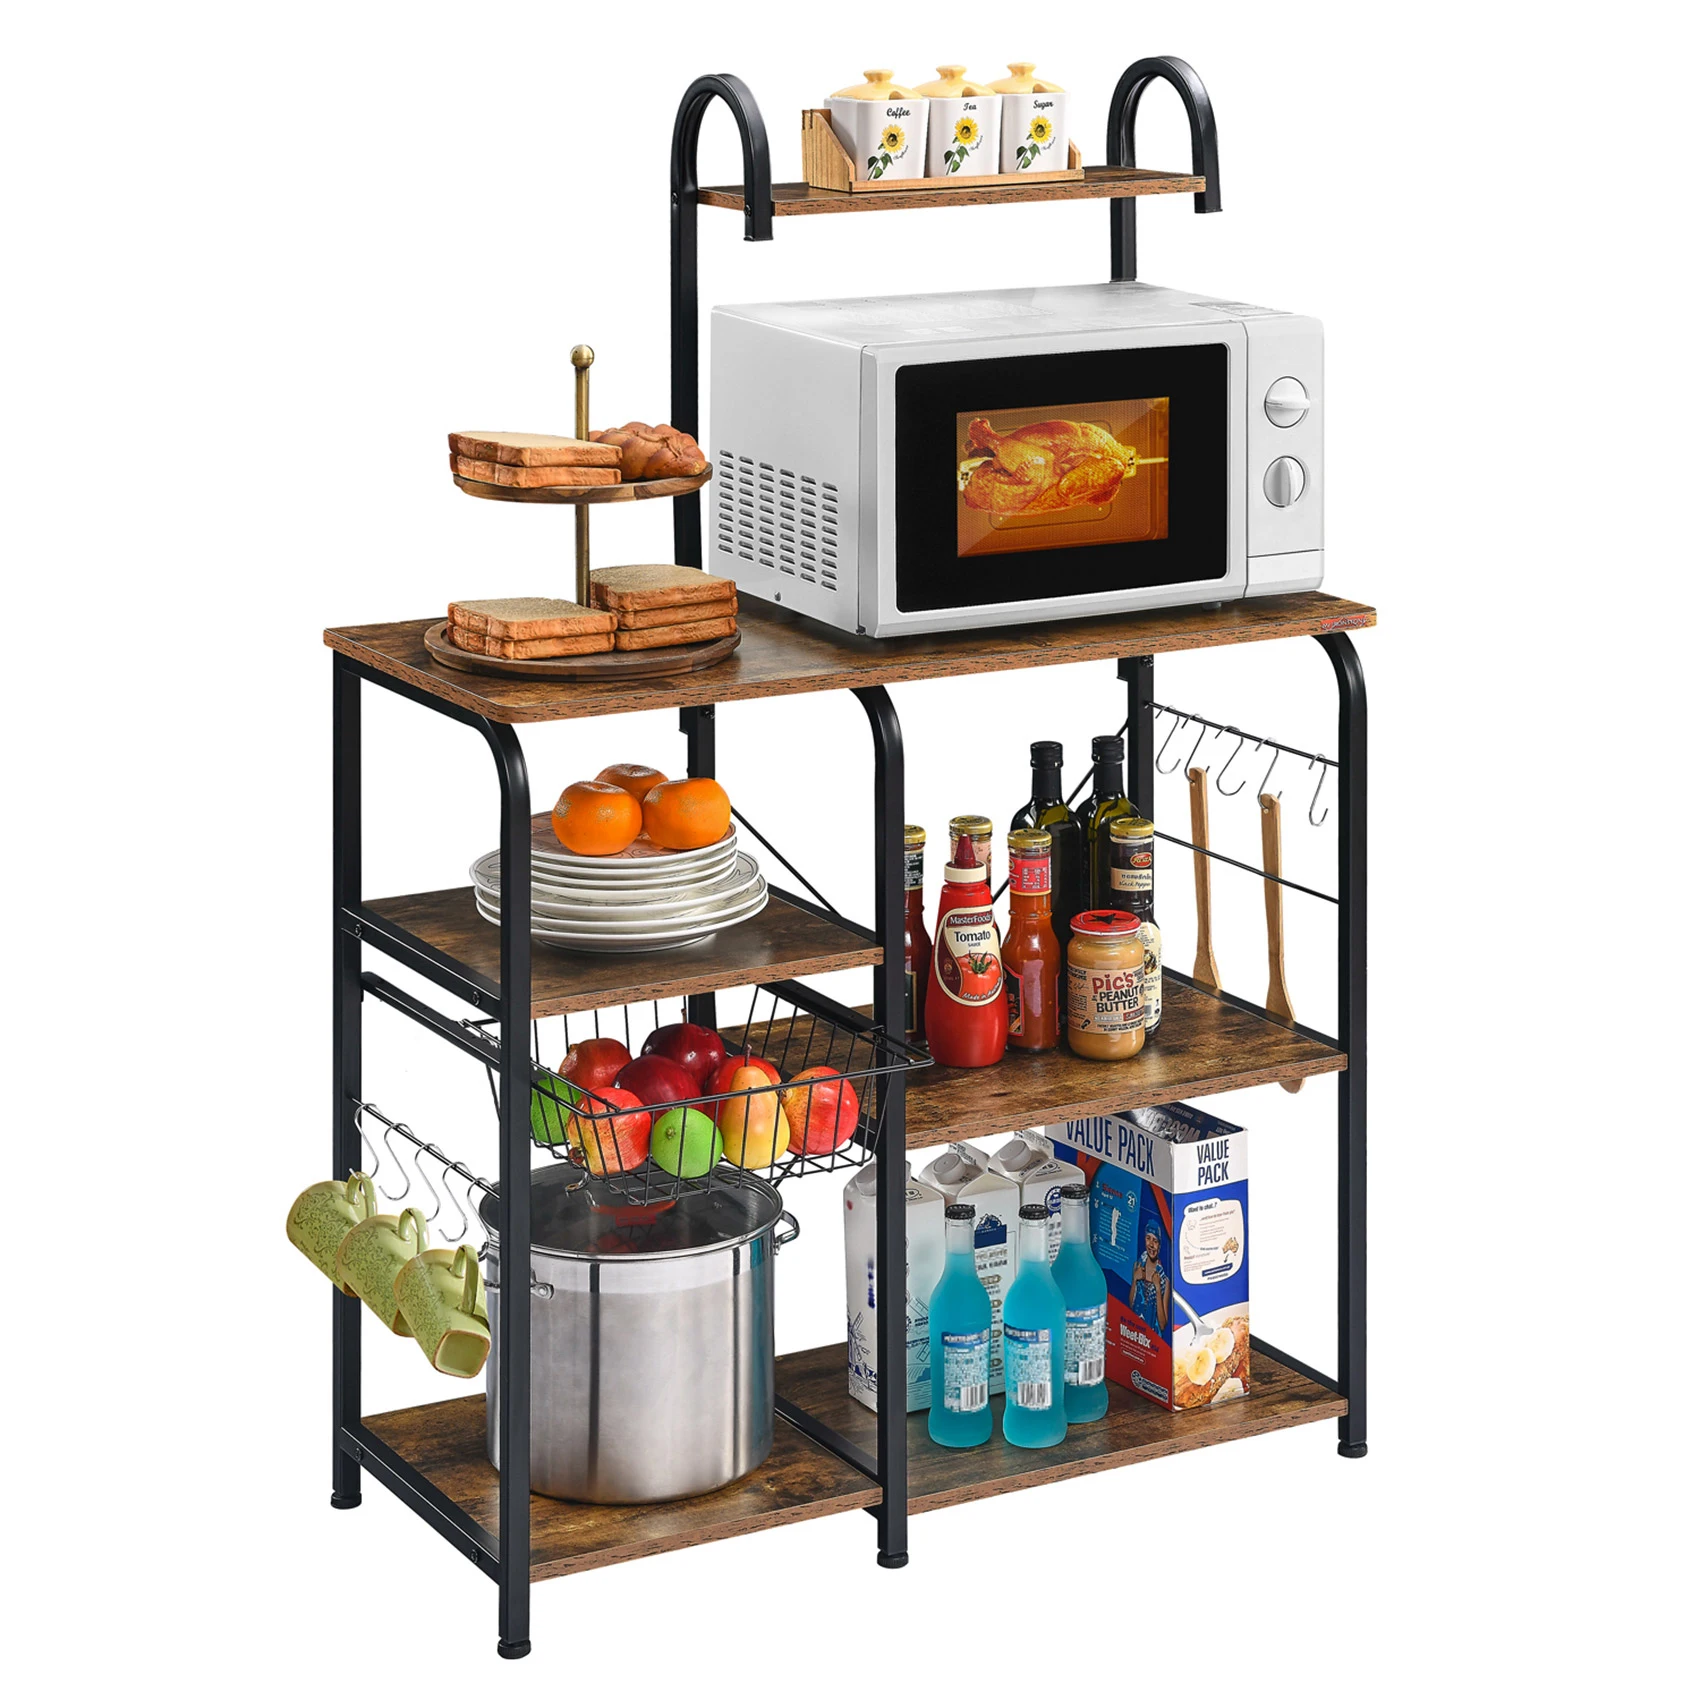 

Industrial Kitchen Baker's Rack Coffee Bar Utility Storage Shelf Microwave Oven Stand 3-Tier+4-Tier Microwave Table